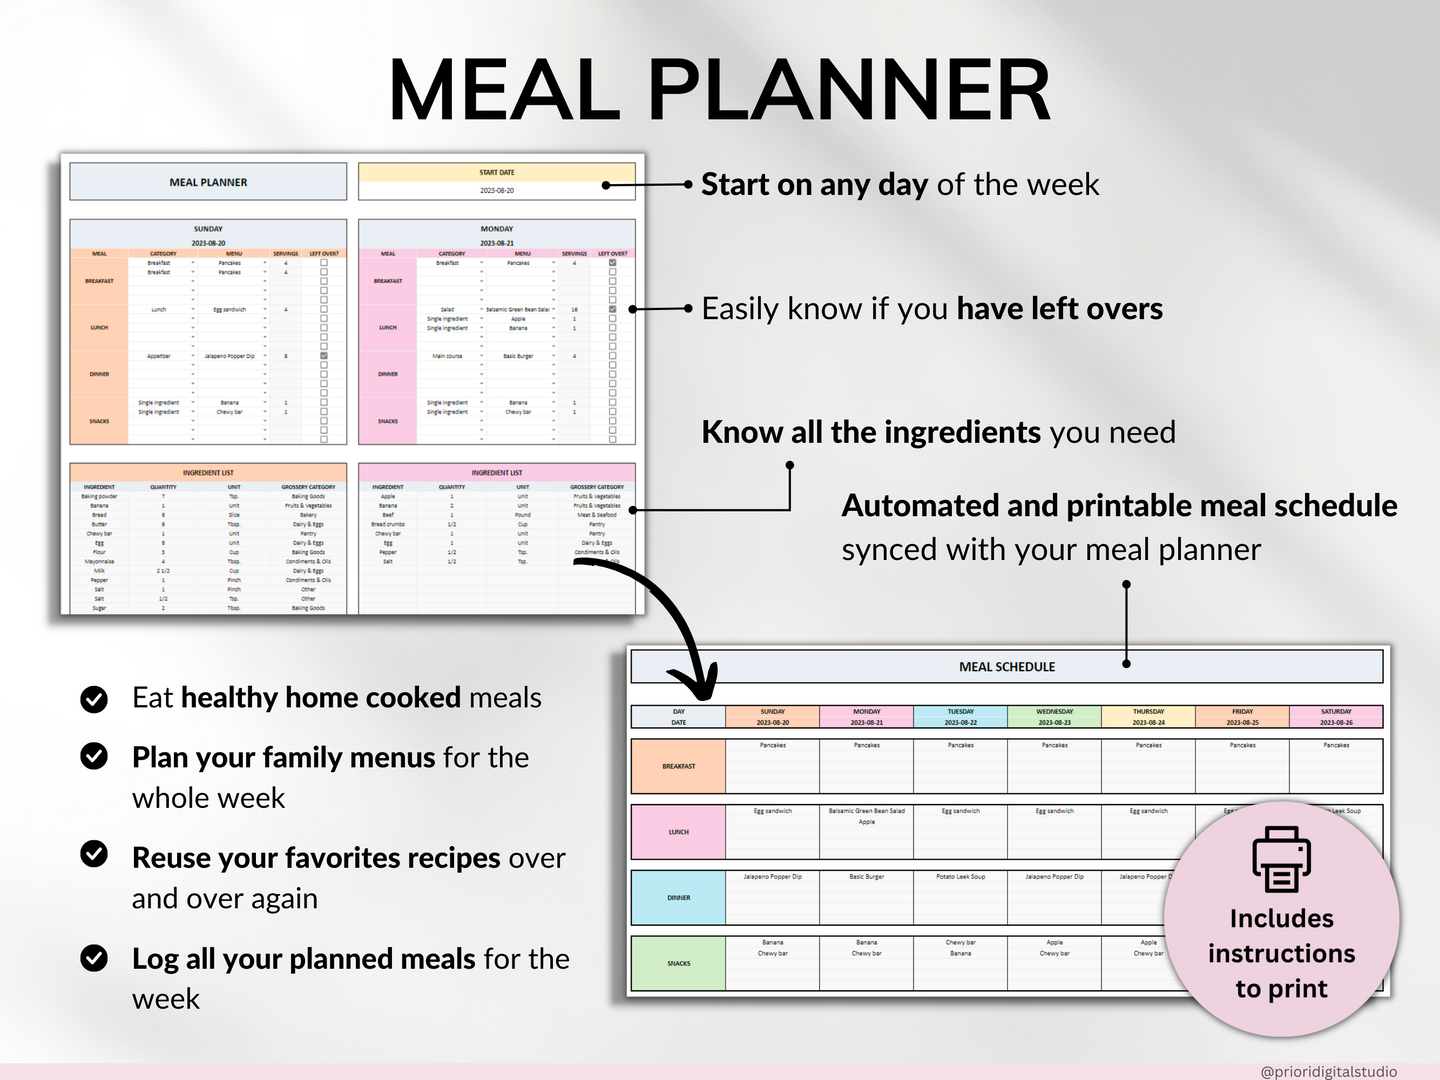 Weekly Meal Planner Spreadsheet Google Sheets Excel Recipe Journal Calorie Tracker Automatic Grocery List Weight Loss Tracker Food Inventory